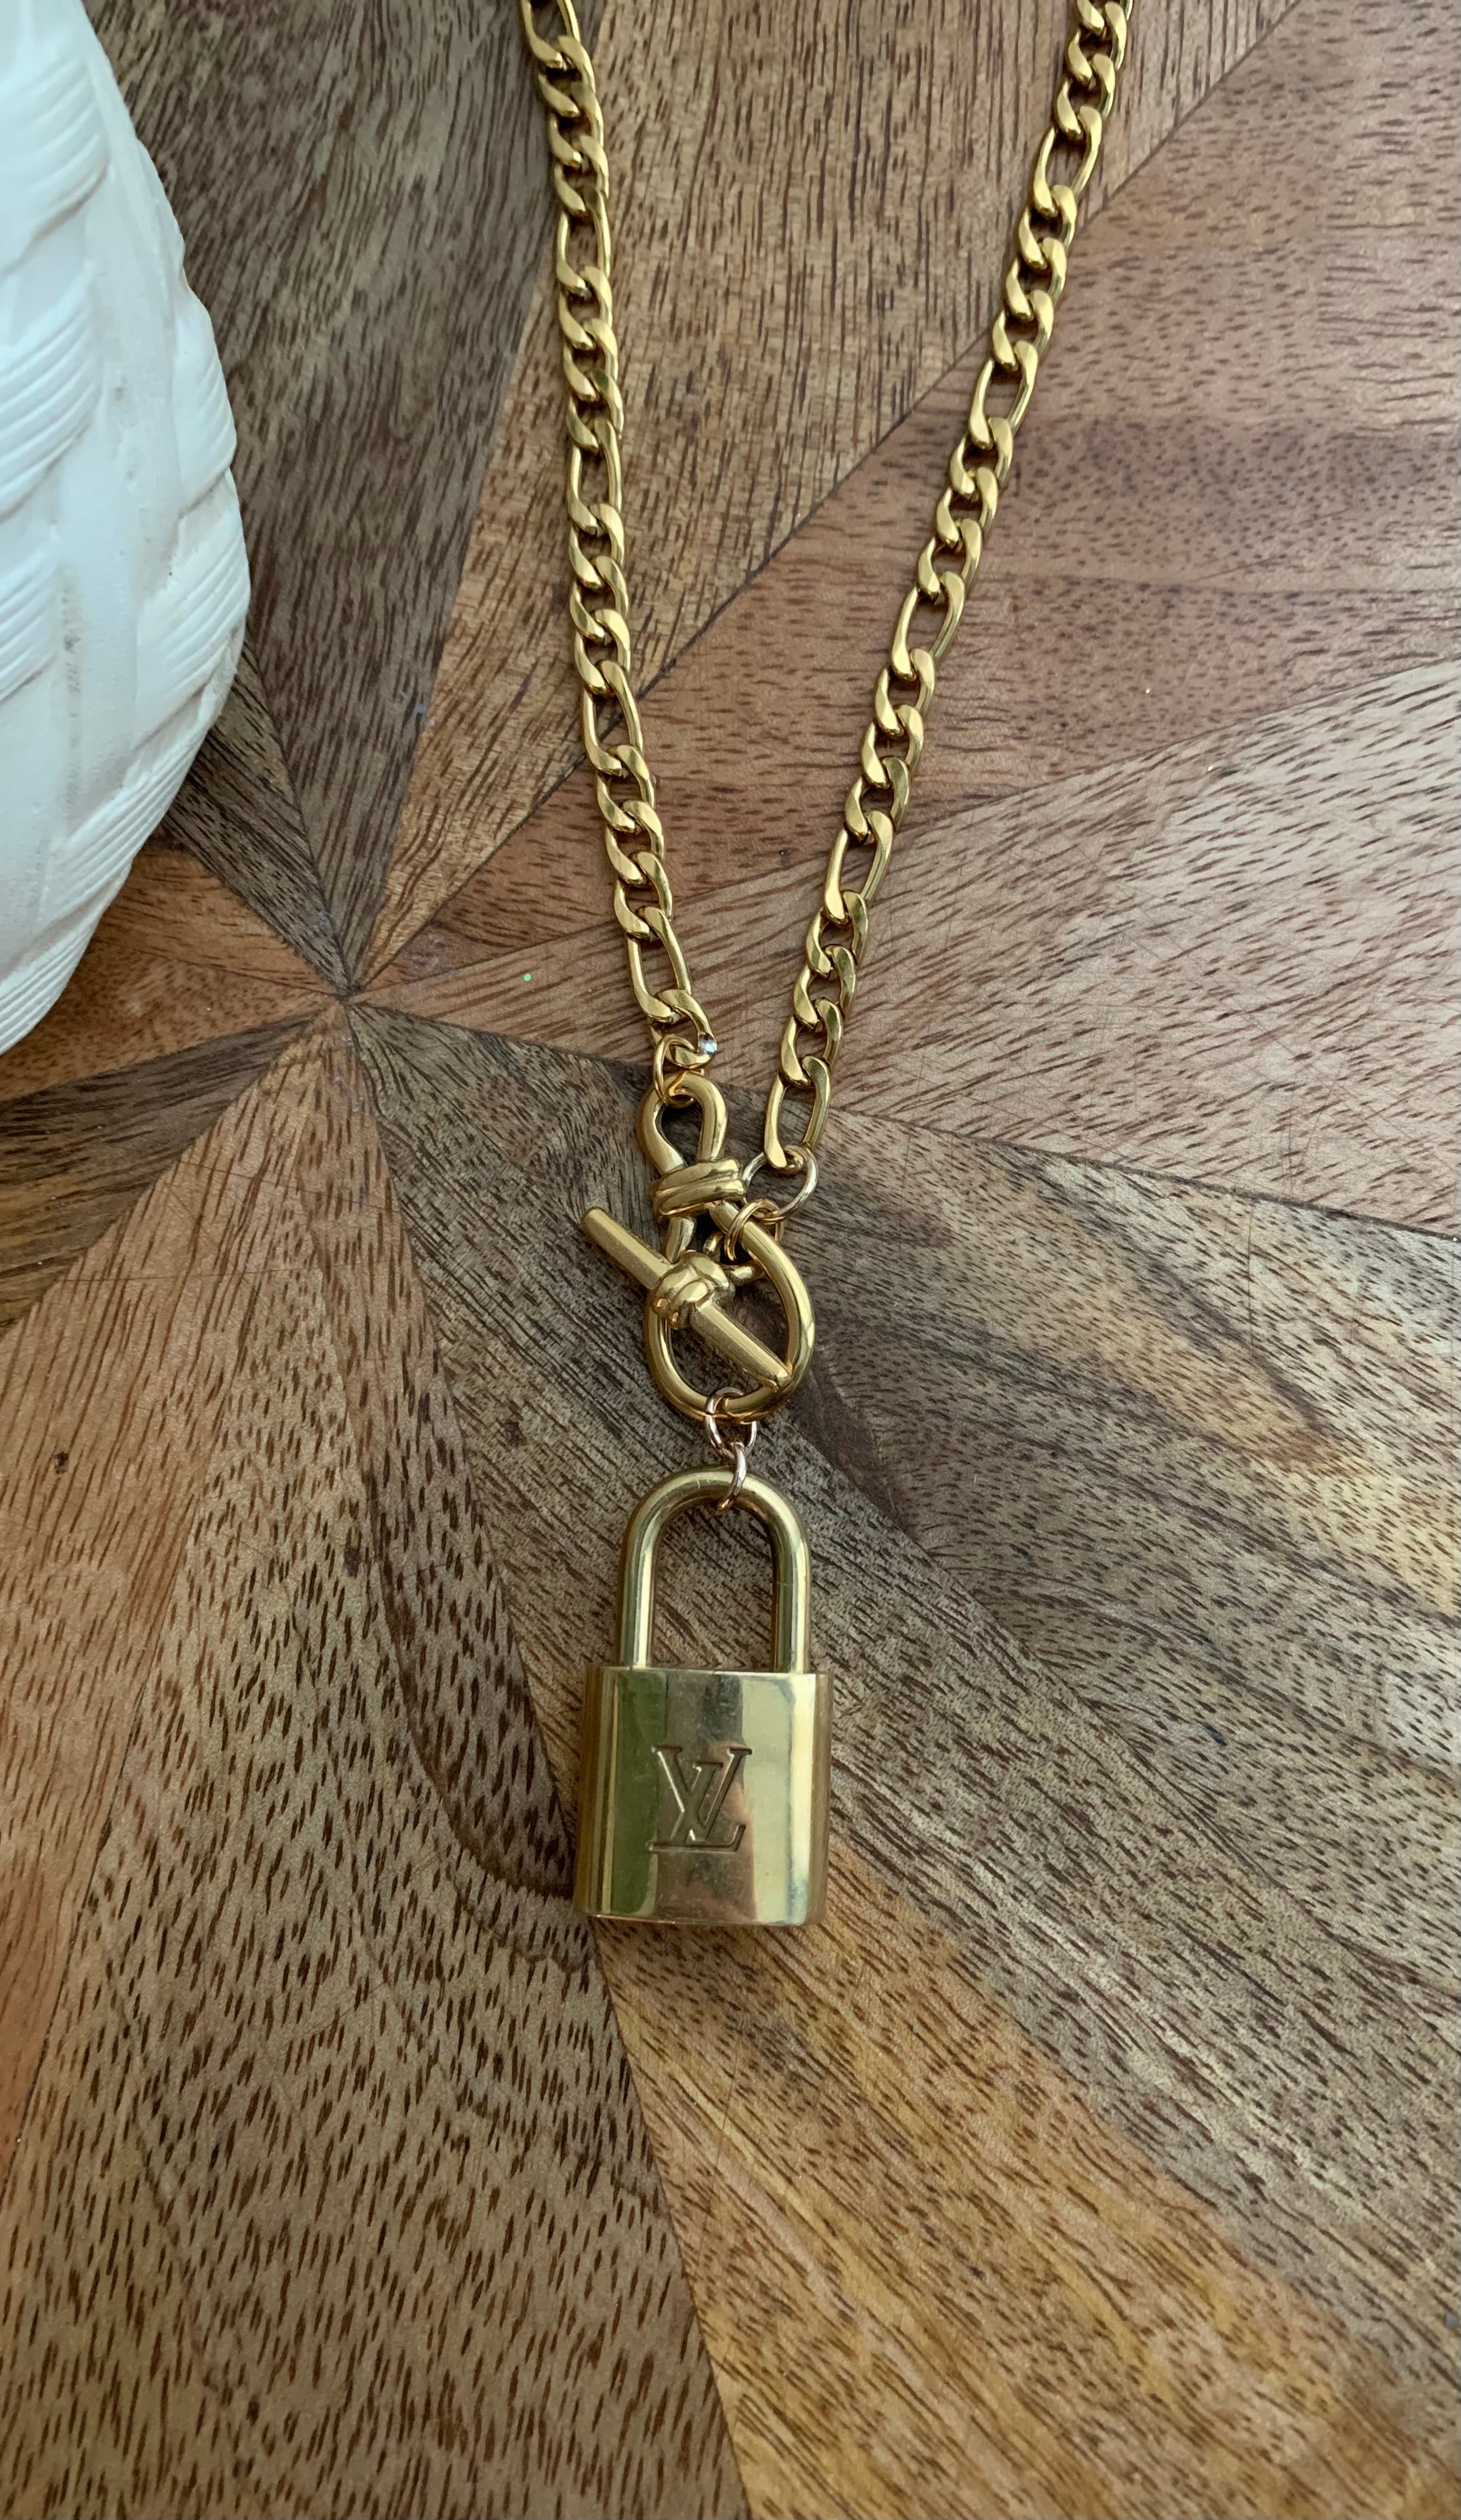 vuitton chain lock and key